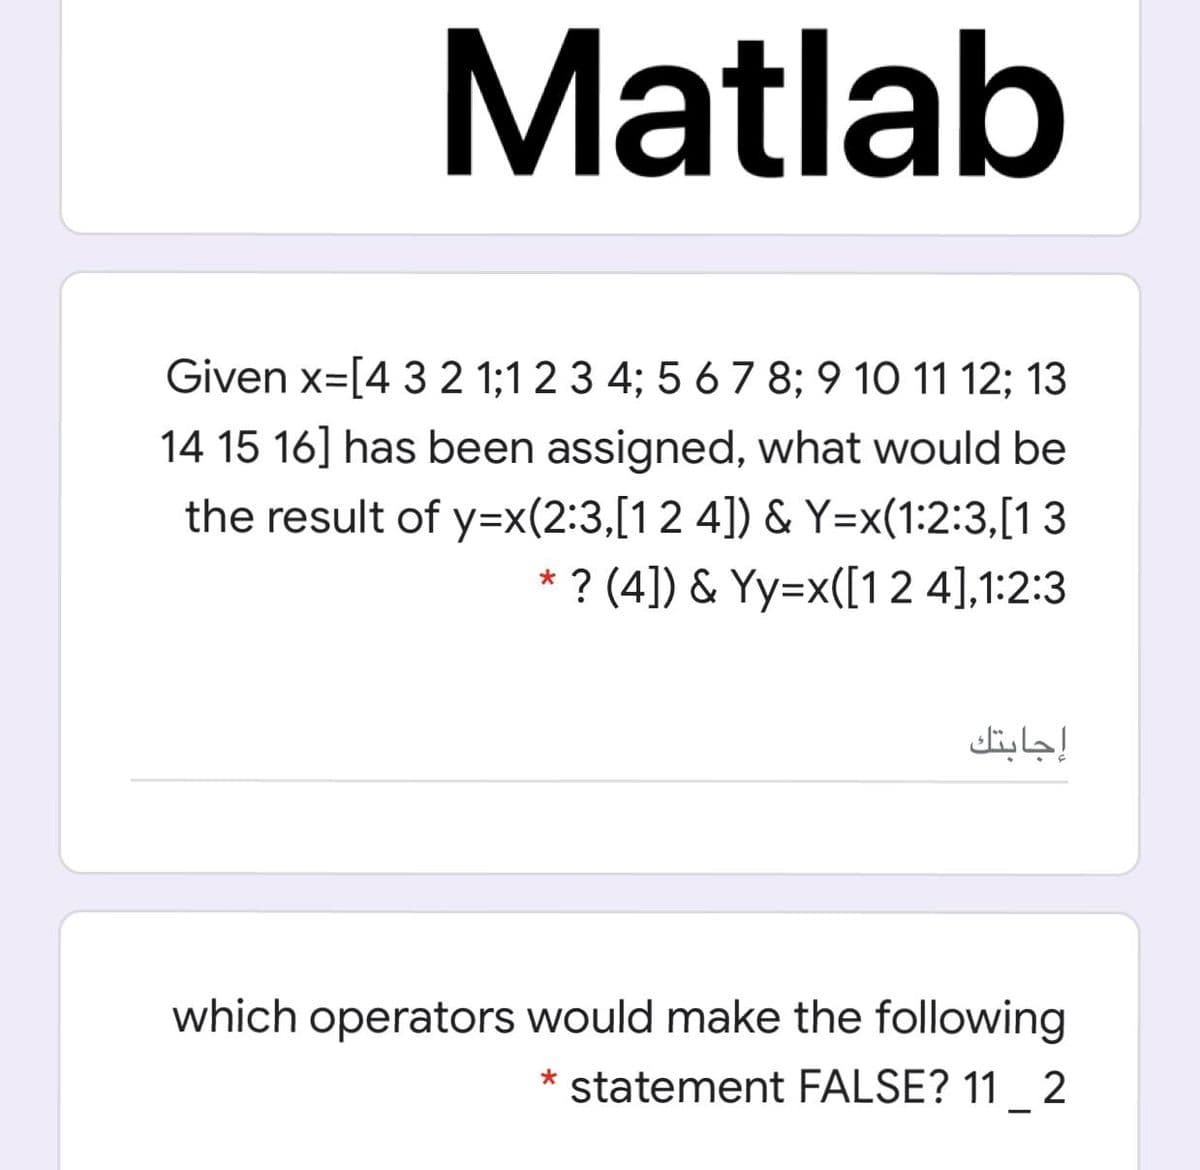 Matlab
Given x=[4 3 2 1;1 2 3 4; 5 6 7 8; 9 10 11 12; 13
14 15 16] has been assigned, what would be
the result of y=x(2:3,[12 4]) & Y=x(1:2:3,[1 3
? (4]) & Yy=x([1 2 4],1:2:3
إجابتك
which operators would make the following
statement FALSE? 11 2
*
